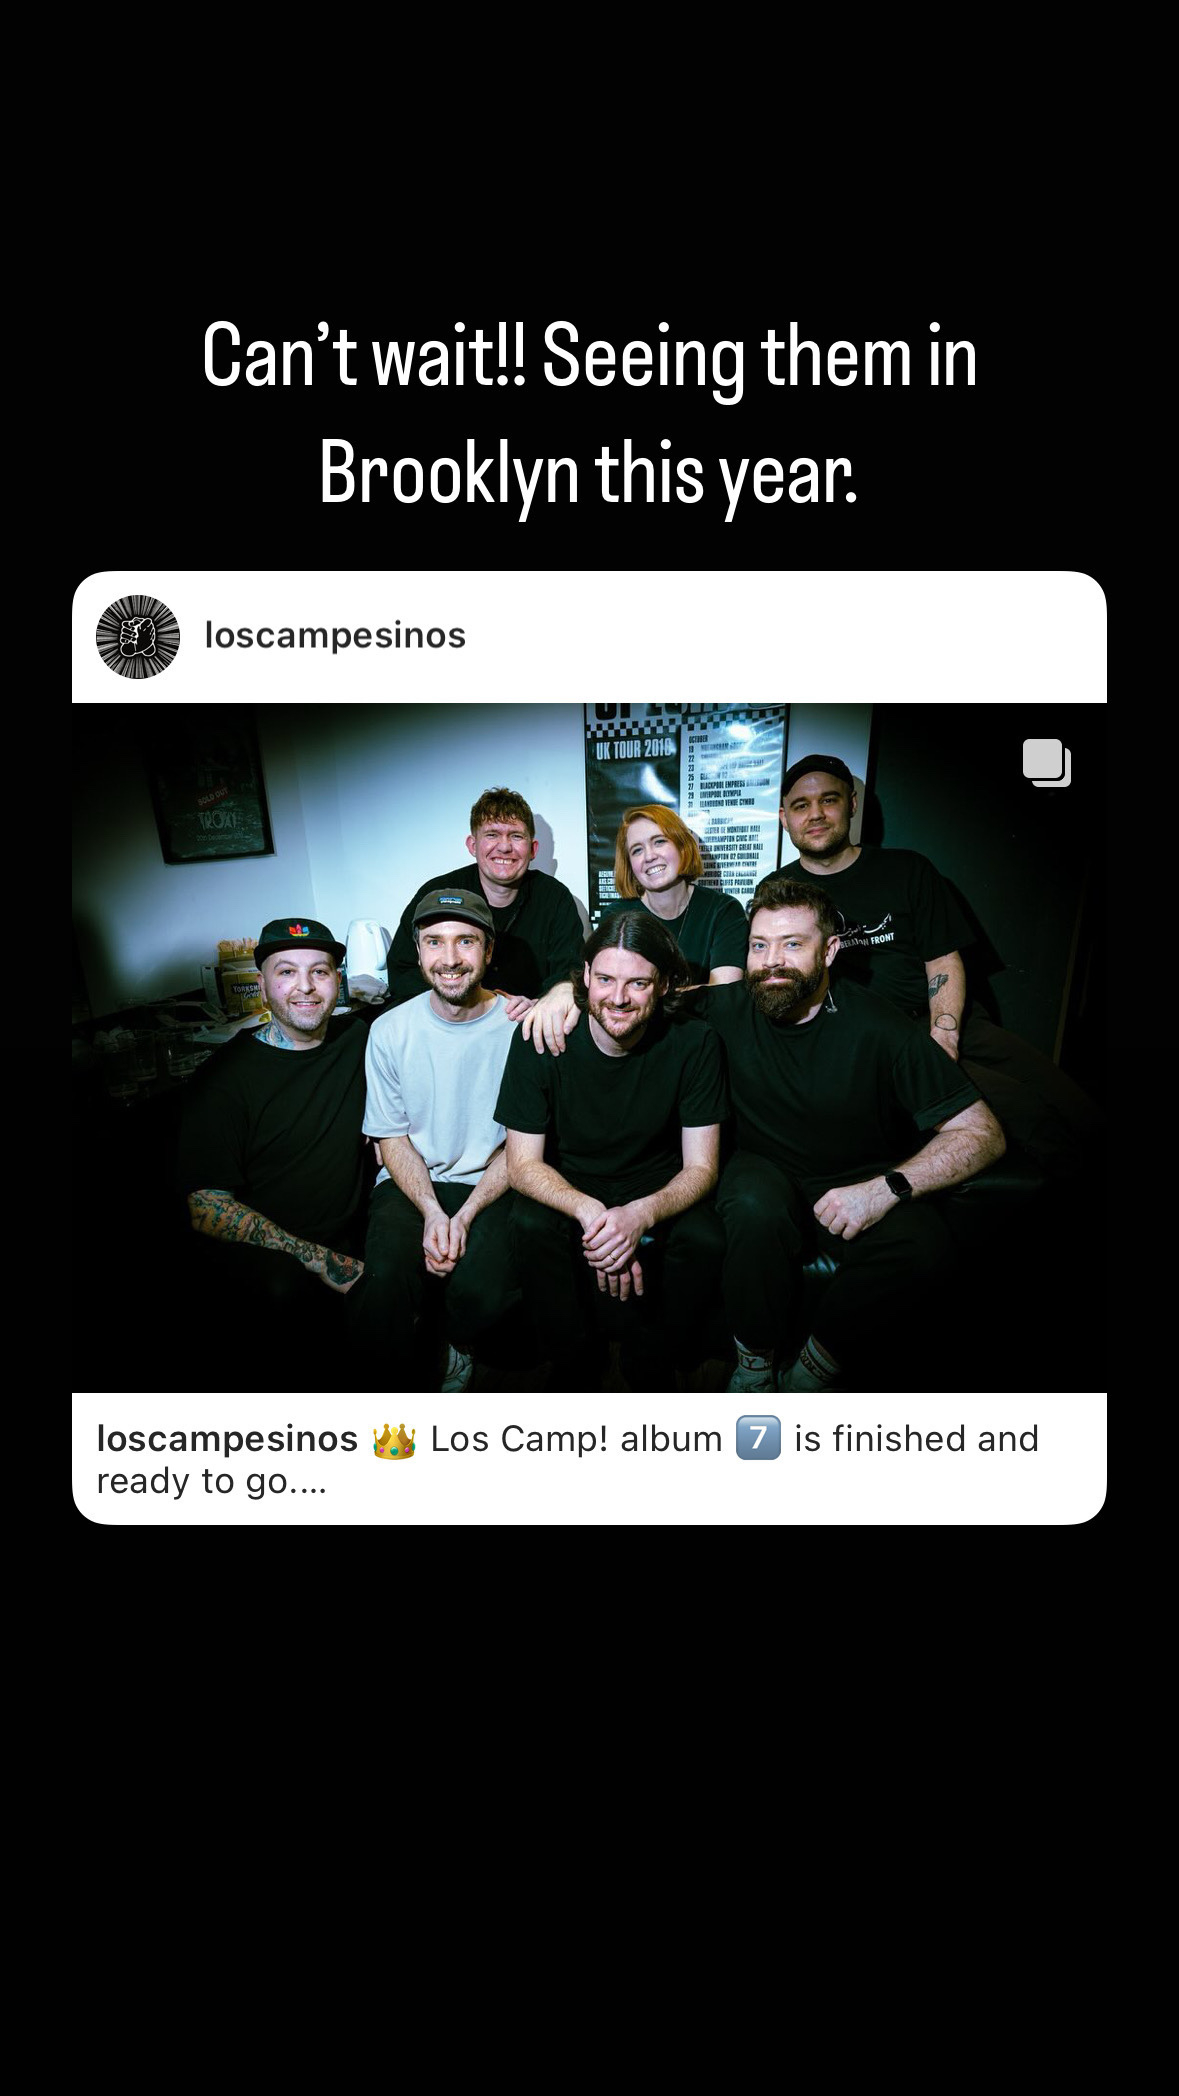 Group of seven people from the band Los Campesinos! posing for a photo, all wearing black tops, with text indicating excitement about seeing the group in Brooklyn and a band's new album being finished.